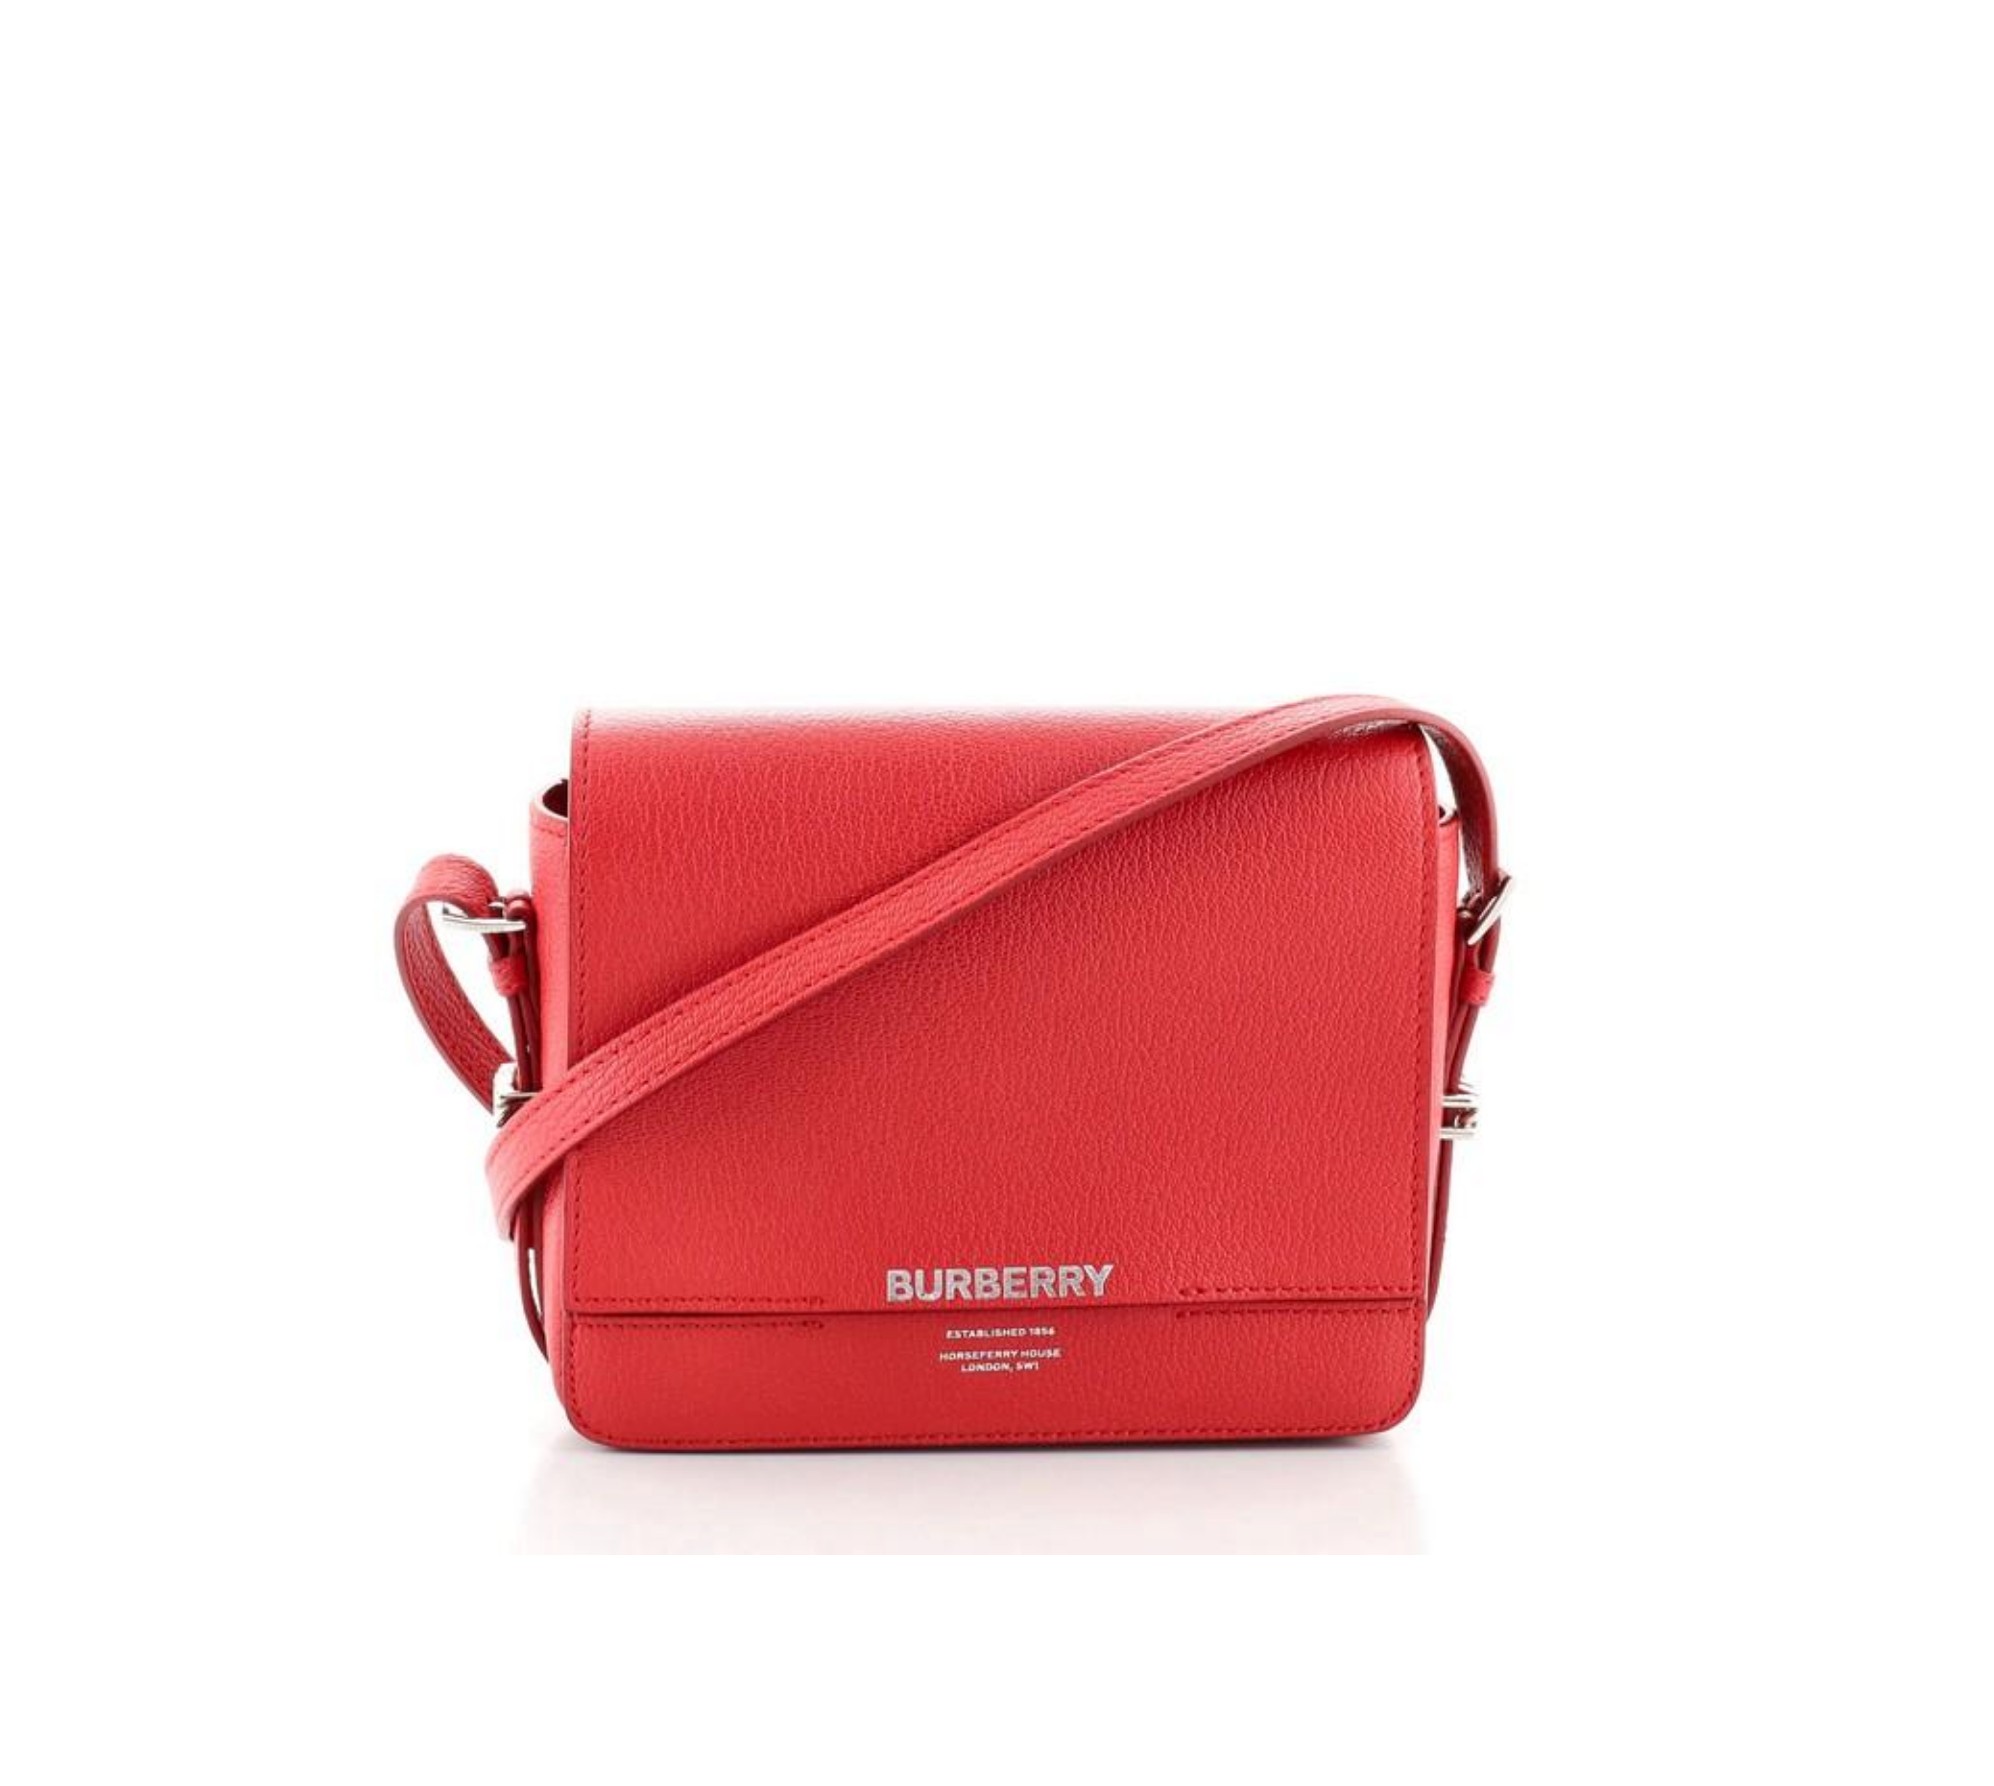 Burberry Small Leather Grace Bag - Farfetch